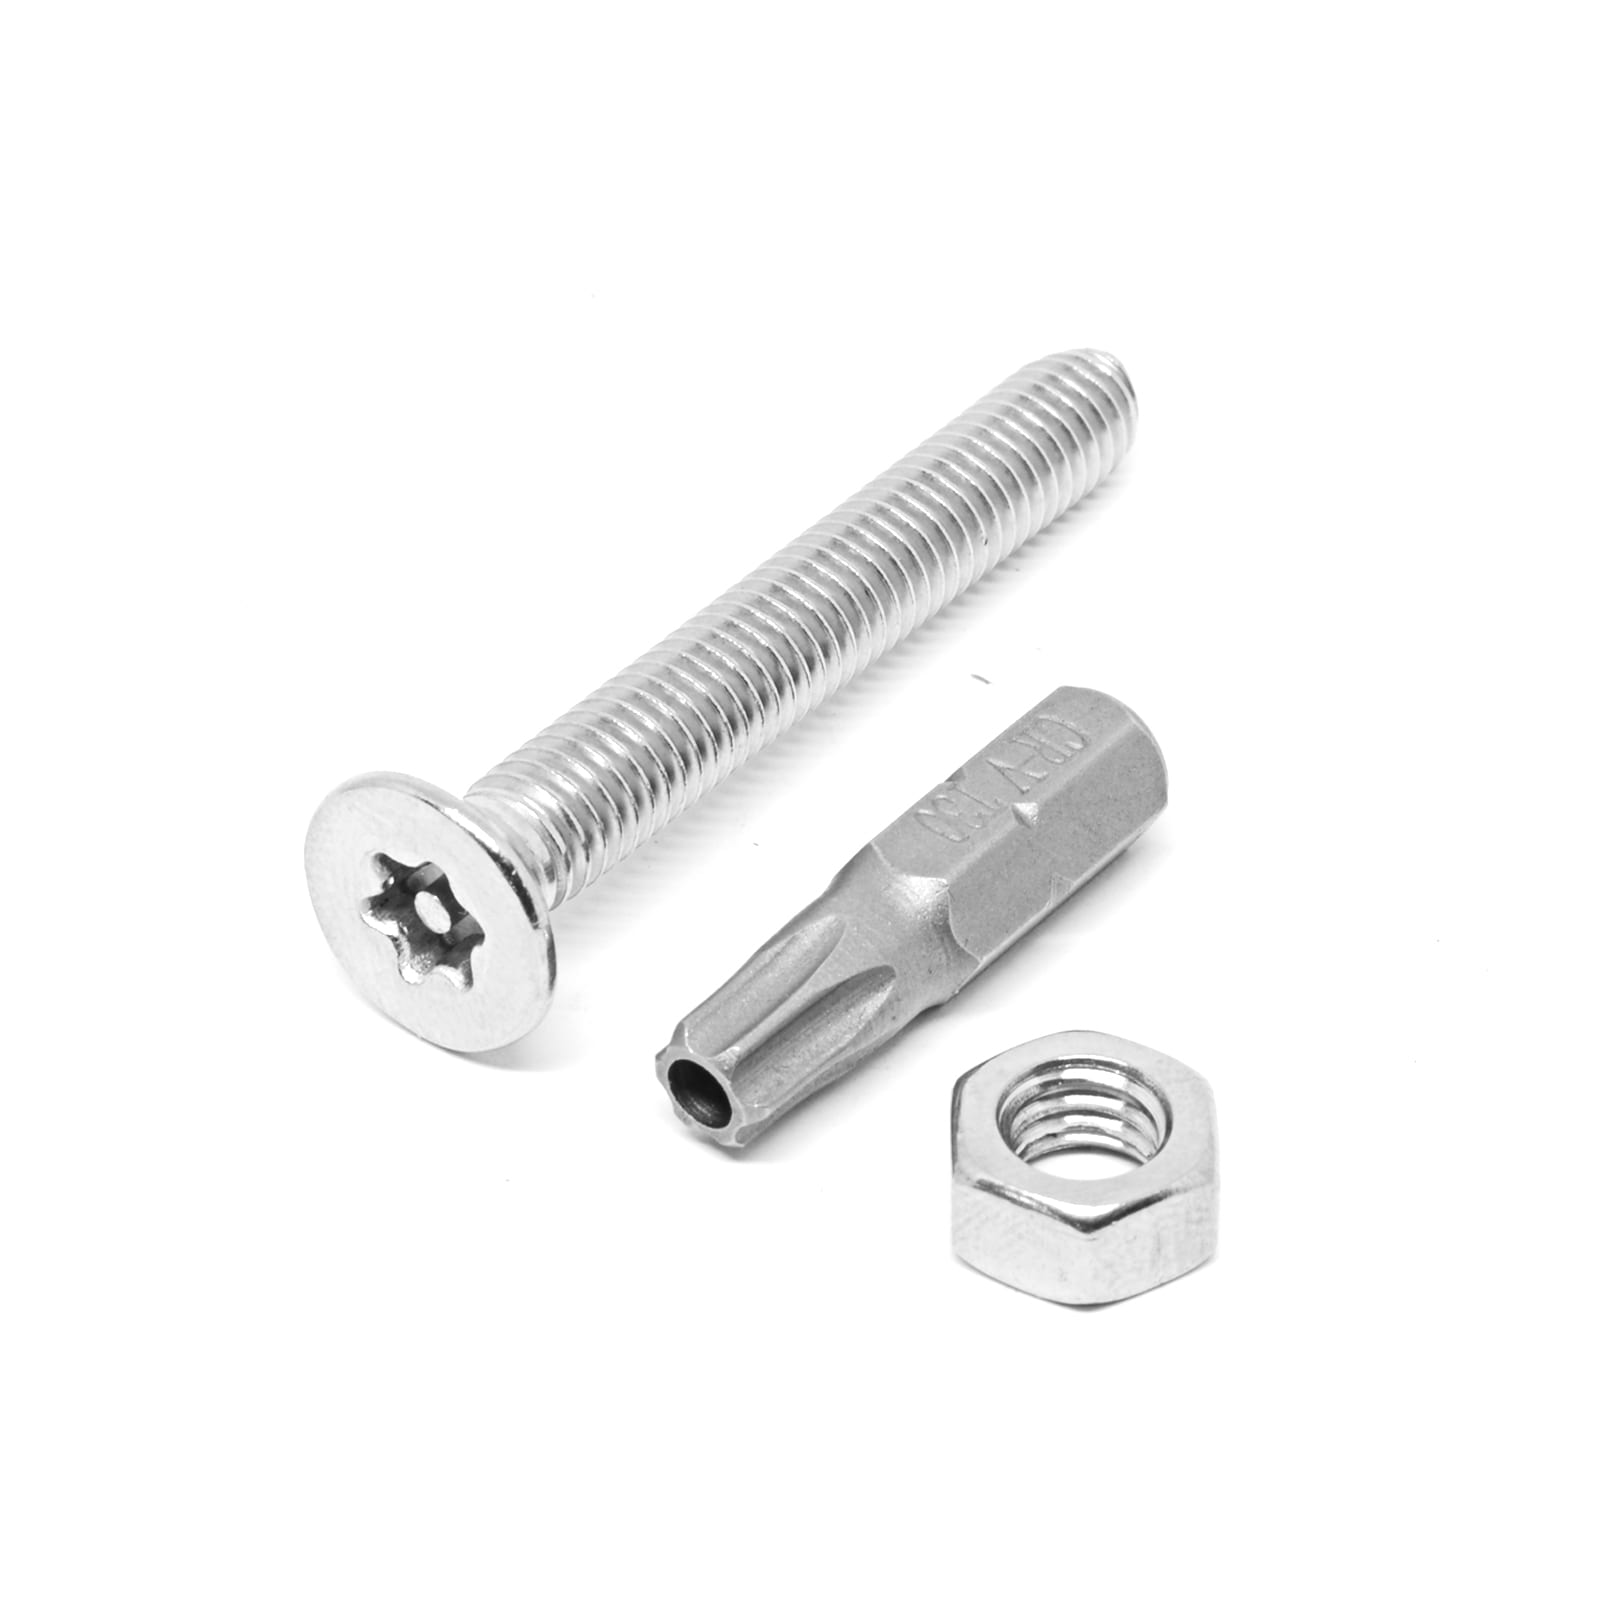 SECURITY BOLT M6 - 1 x 45 STAINLESS STEEL FLAT HEAD